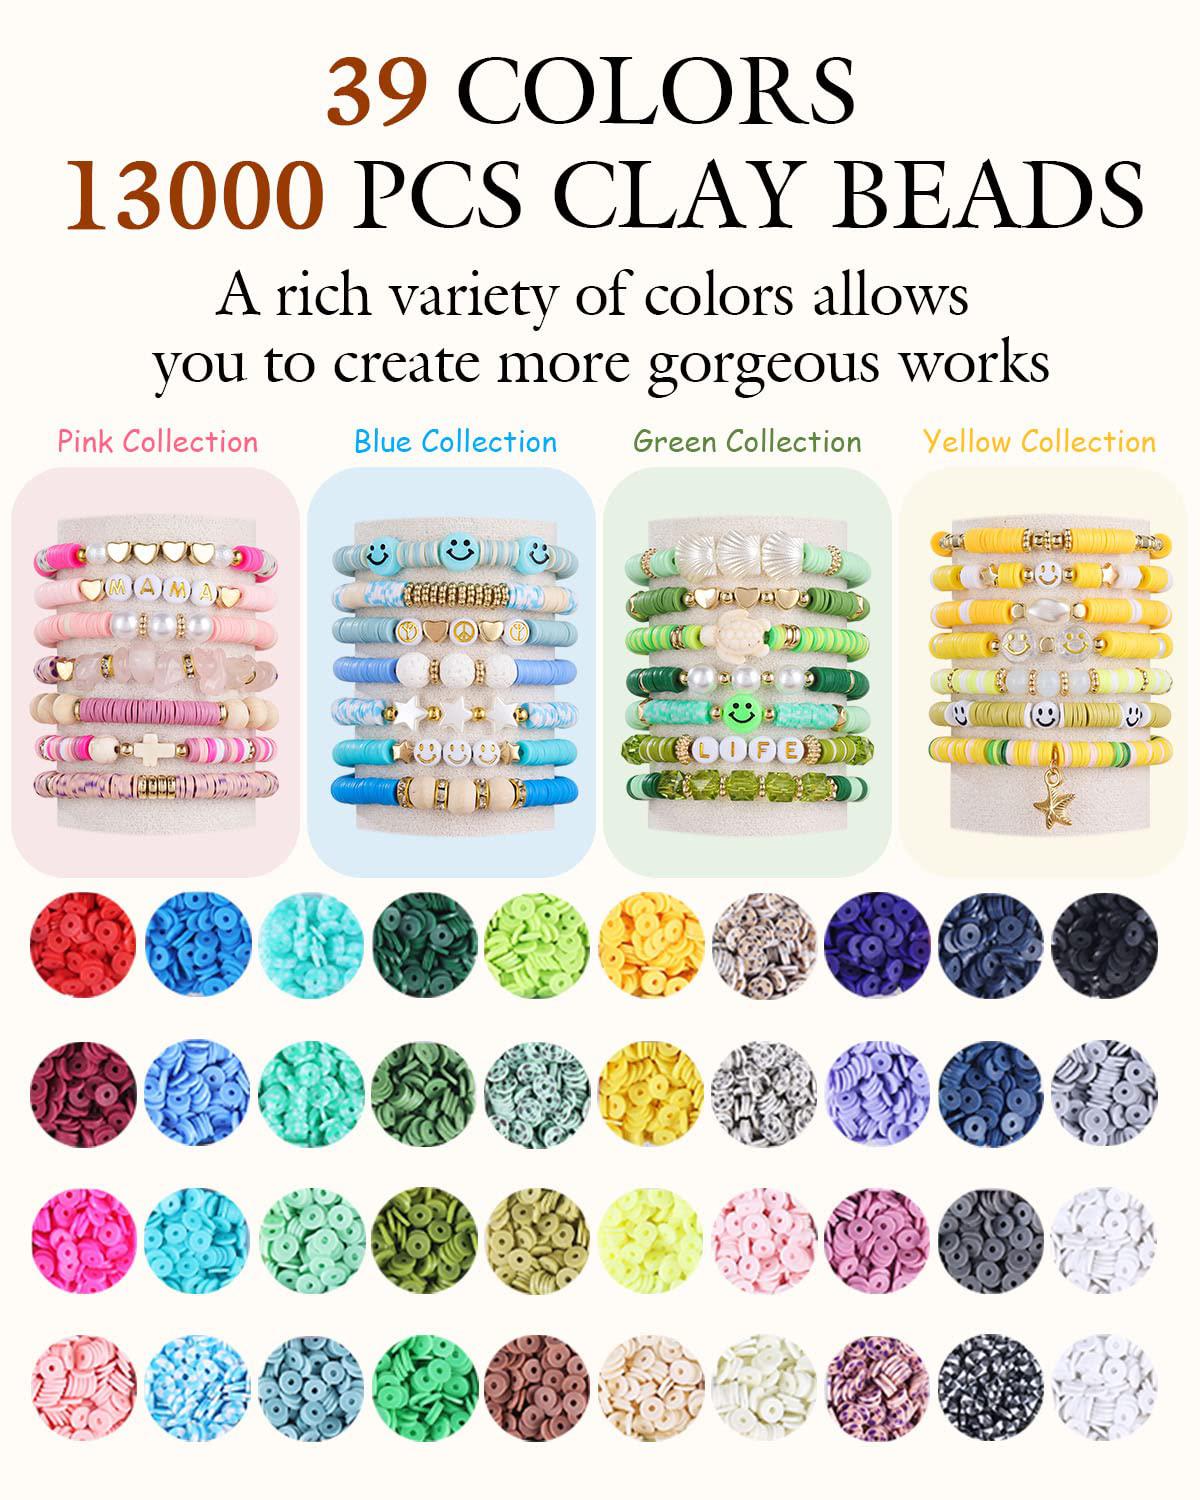 bozuan 4 box 13000 clay beads and 1220 charms, clay beads for bracelet making kit for teen girls ages 6-12, jewelry making kit with 